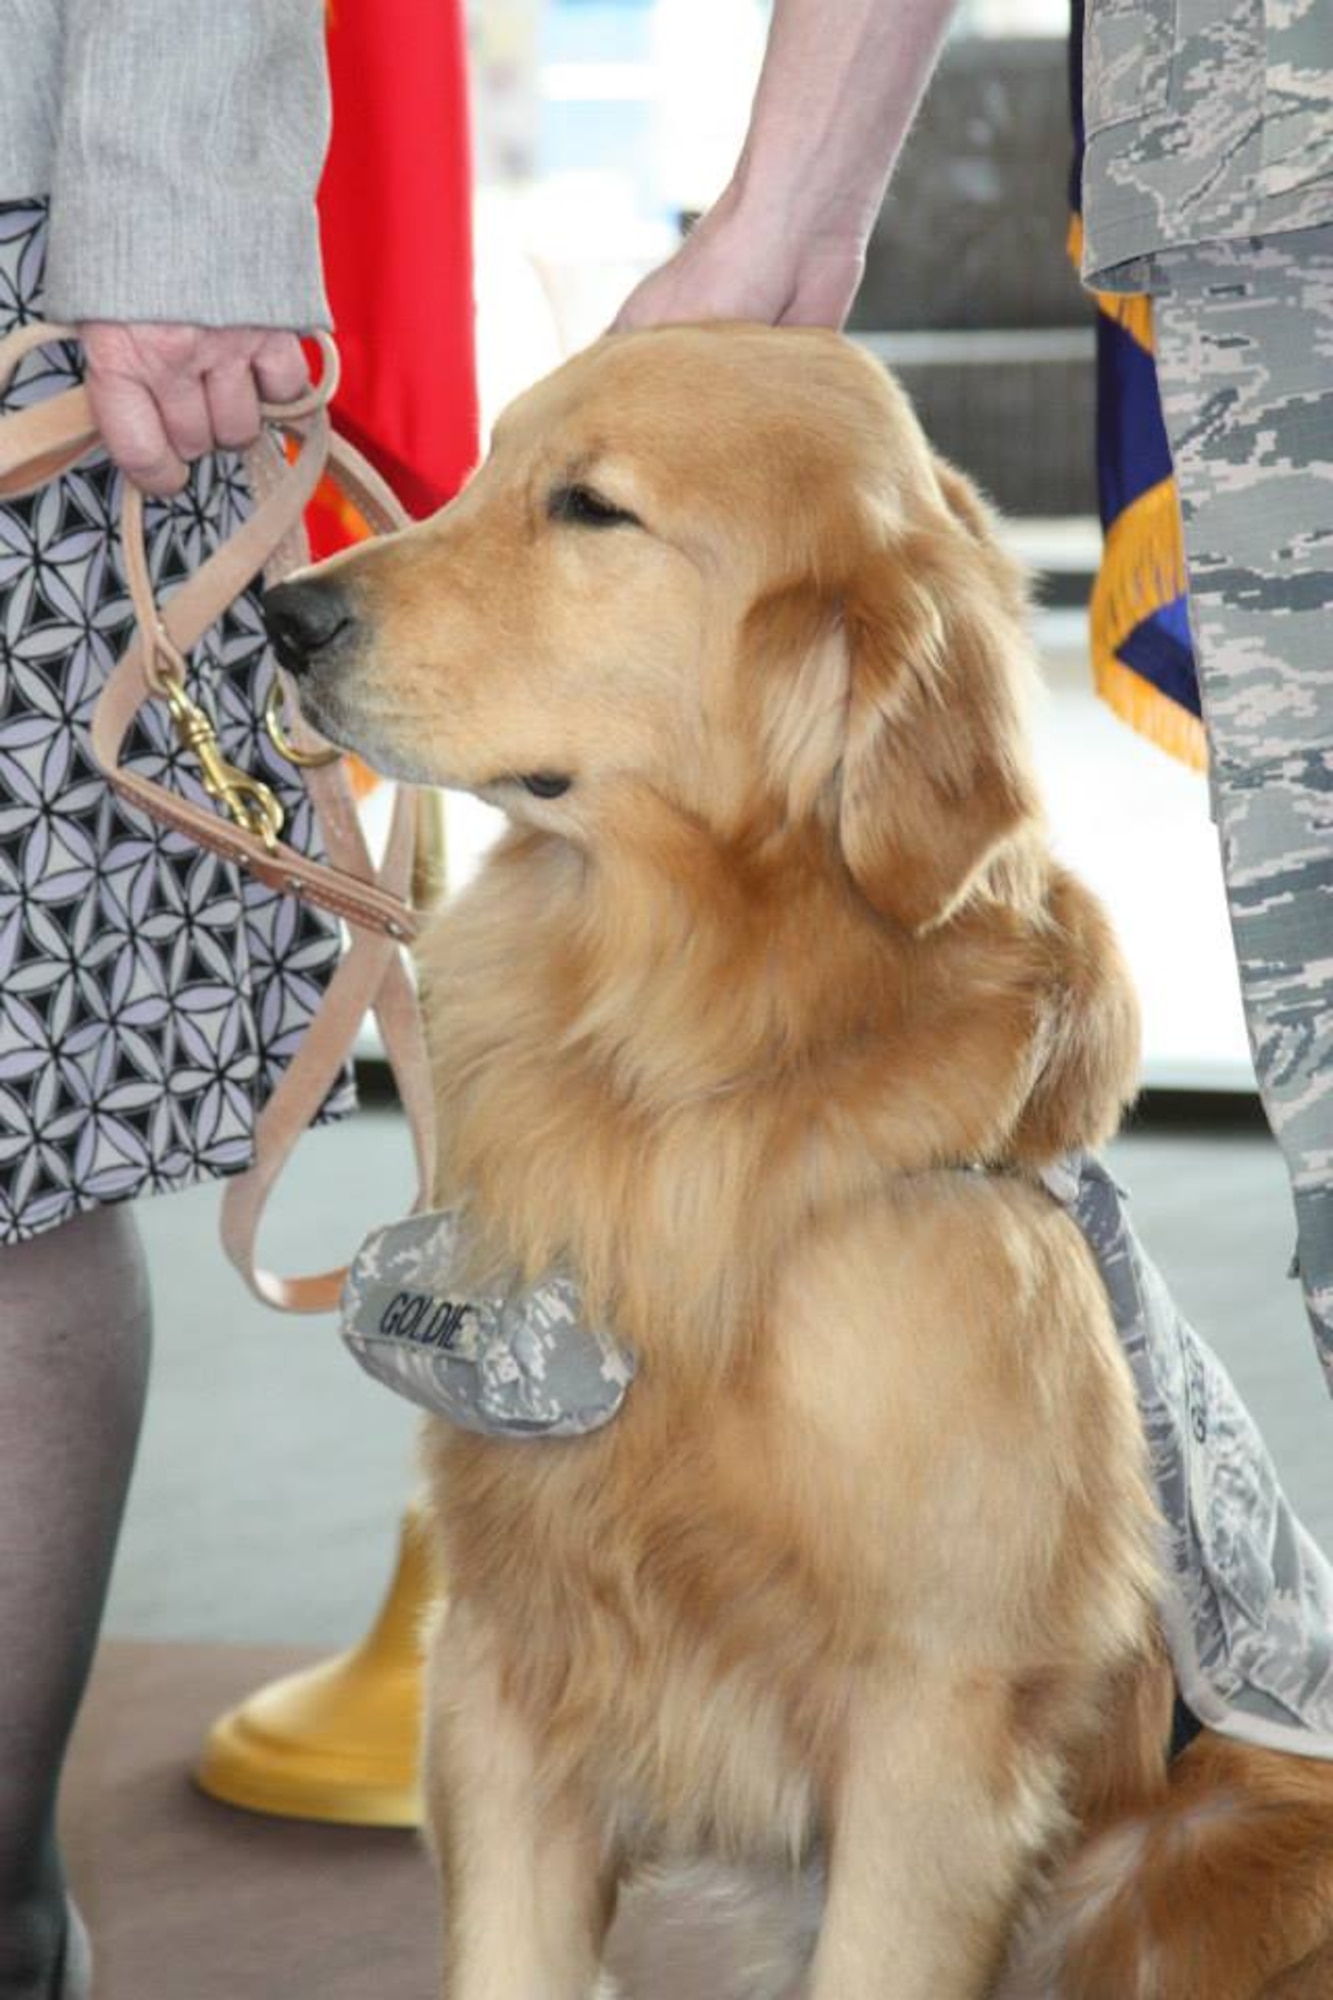 Chief Master Sgt. of the Air Force James A. Cody, the highest ranking enlisted member in the U.S. Air Force, pats Goldie, held by Patty Barry, coordinator of the facility dog program at Walter Reed Bethesda, before the Golden Retriever’s commission as a second lieutenant by Air Force Chief of Staff Gen. Mark A. Welsh III (left) on March 12 at Walter Reed National Military Medical Center. (Photo by Bernard S. Little)